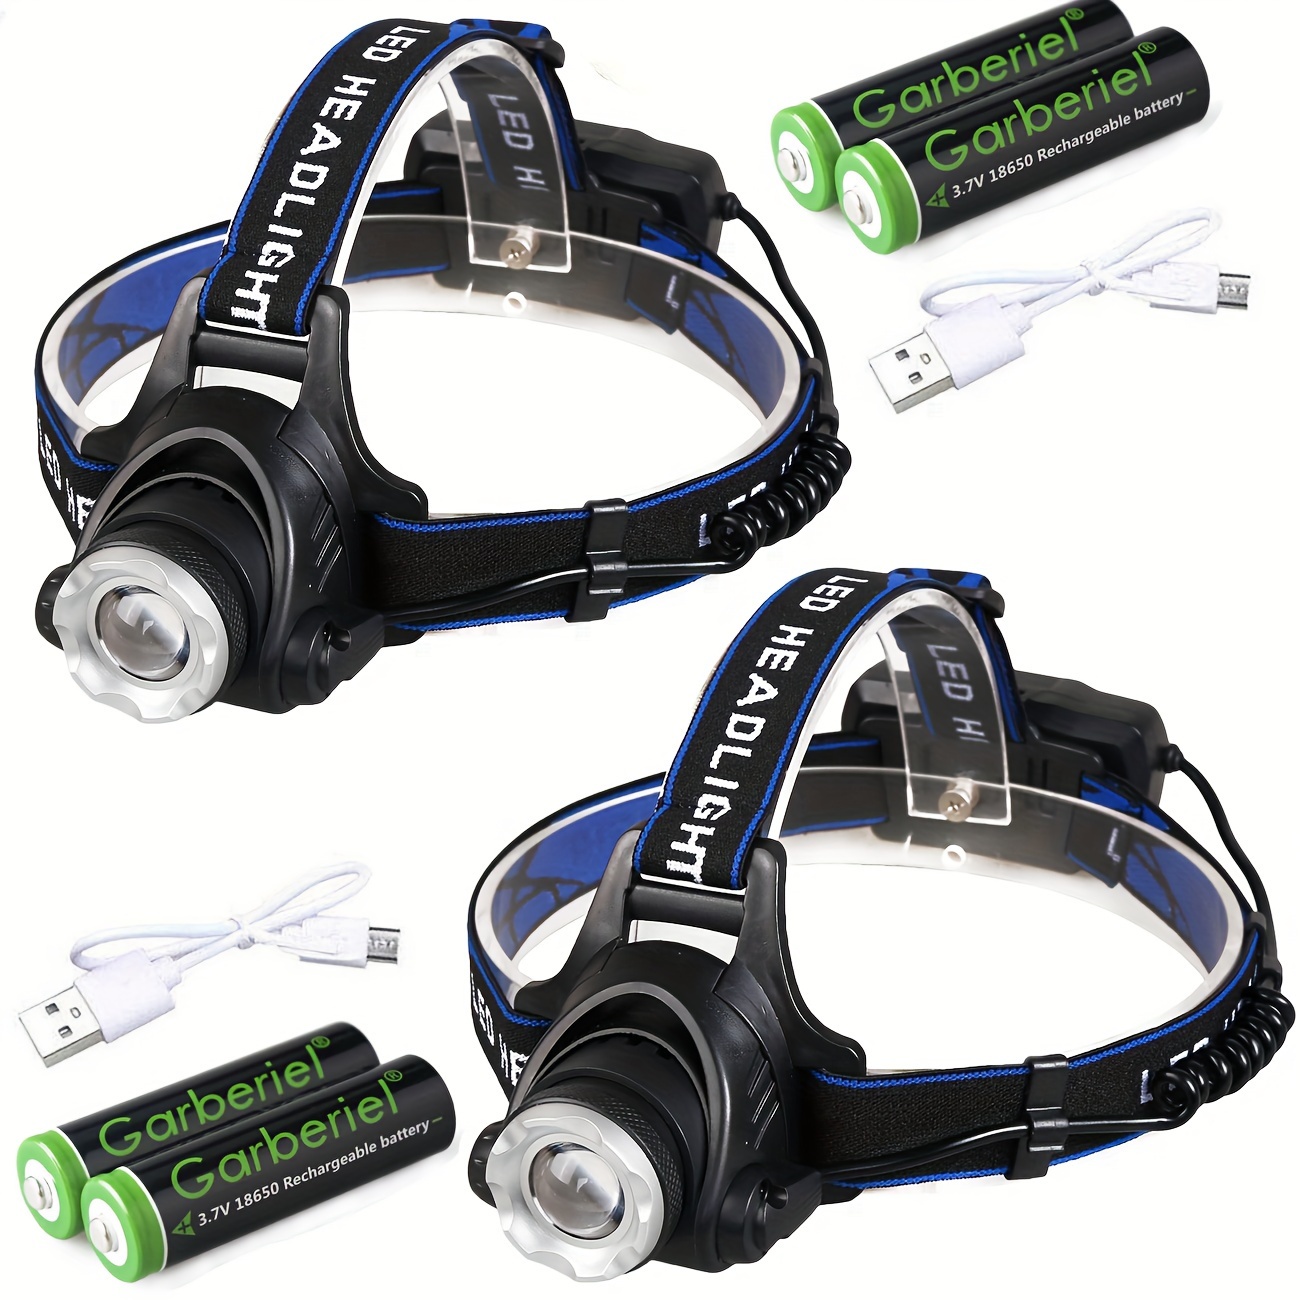 

2pcs Super Bright 3 Modes Zoomable Led Headlamp, High Lumens Usb Rechargeable Waterproof Headlight With 18650 Batteries For Hiking Camping Fishing